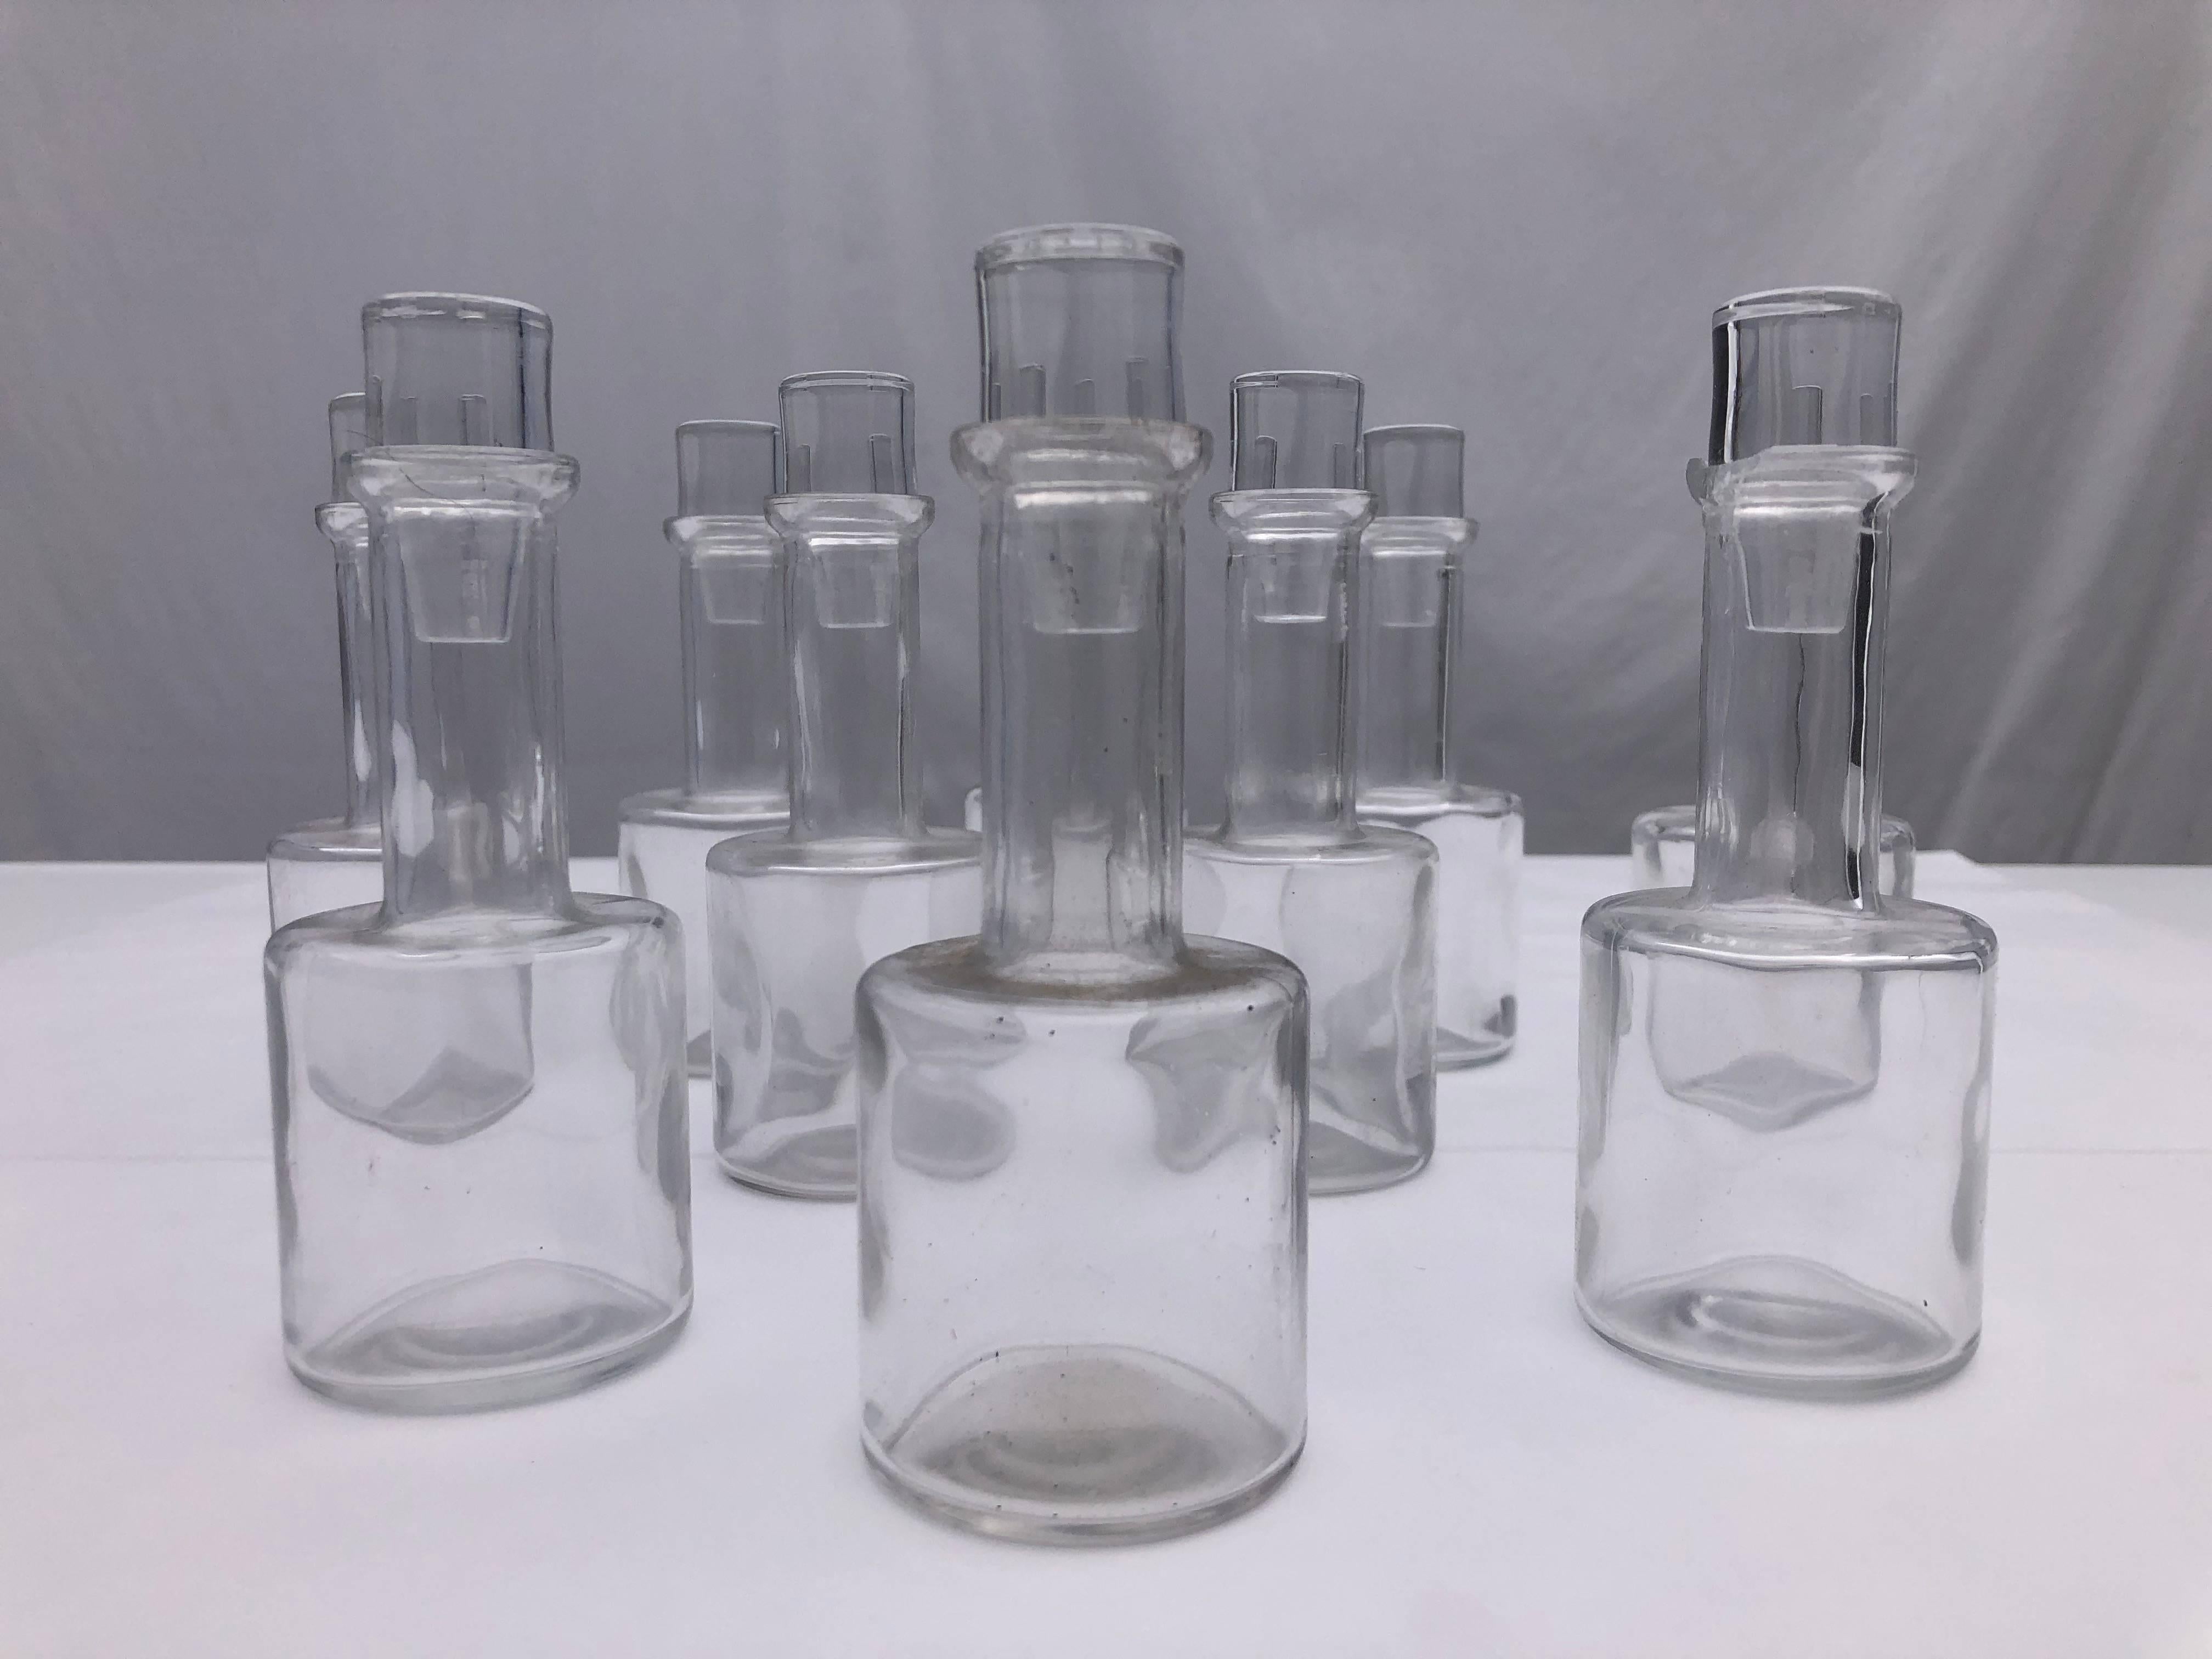 This is a set of 10 hand blown glass bottles with stoppers that came from a Parisian restaurant. The stoppers have frosted glass and together the bottles and stoppers make a lovely collection. They could be used in a kitchen to hold oils and spices